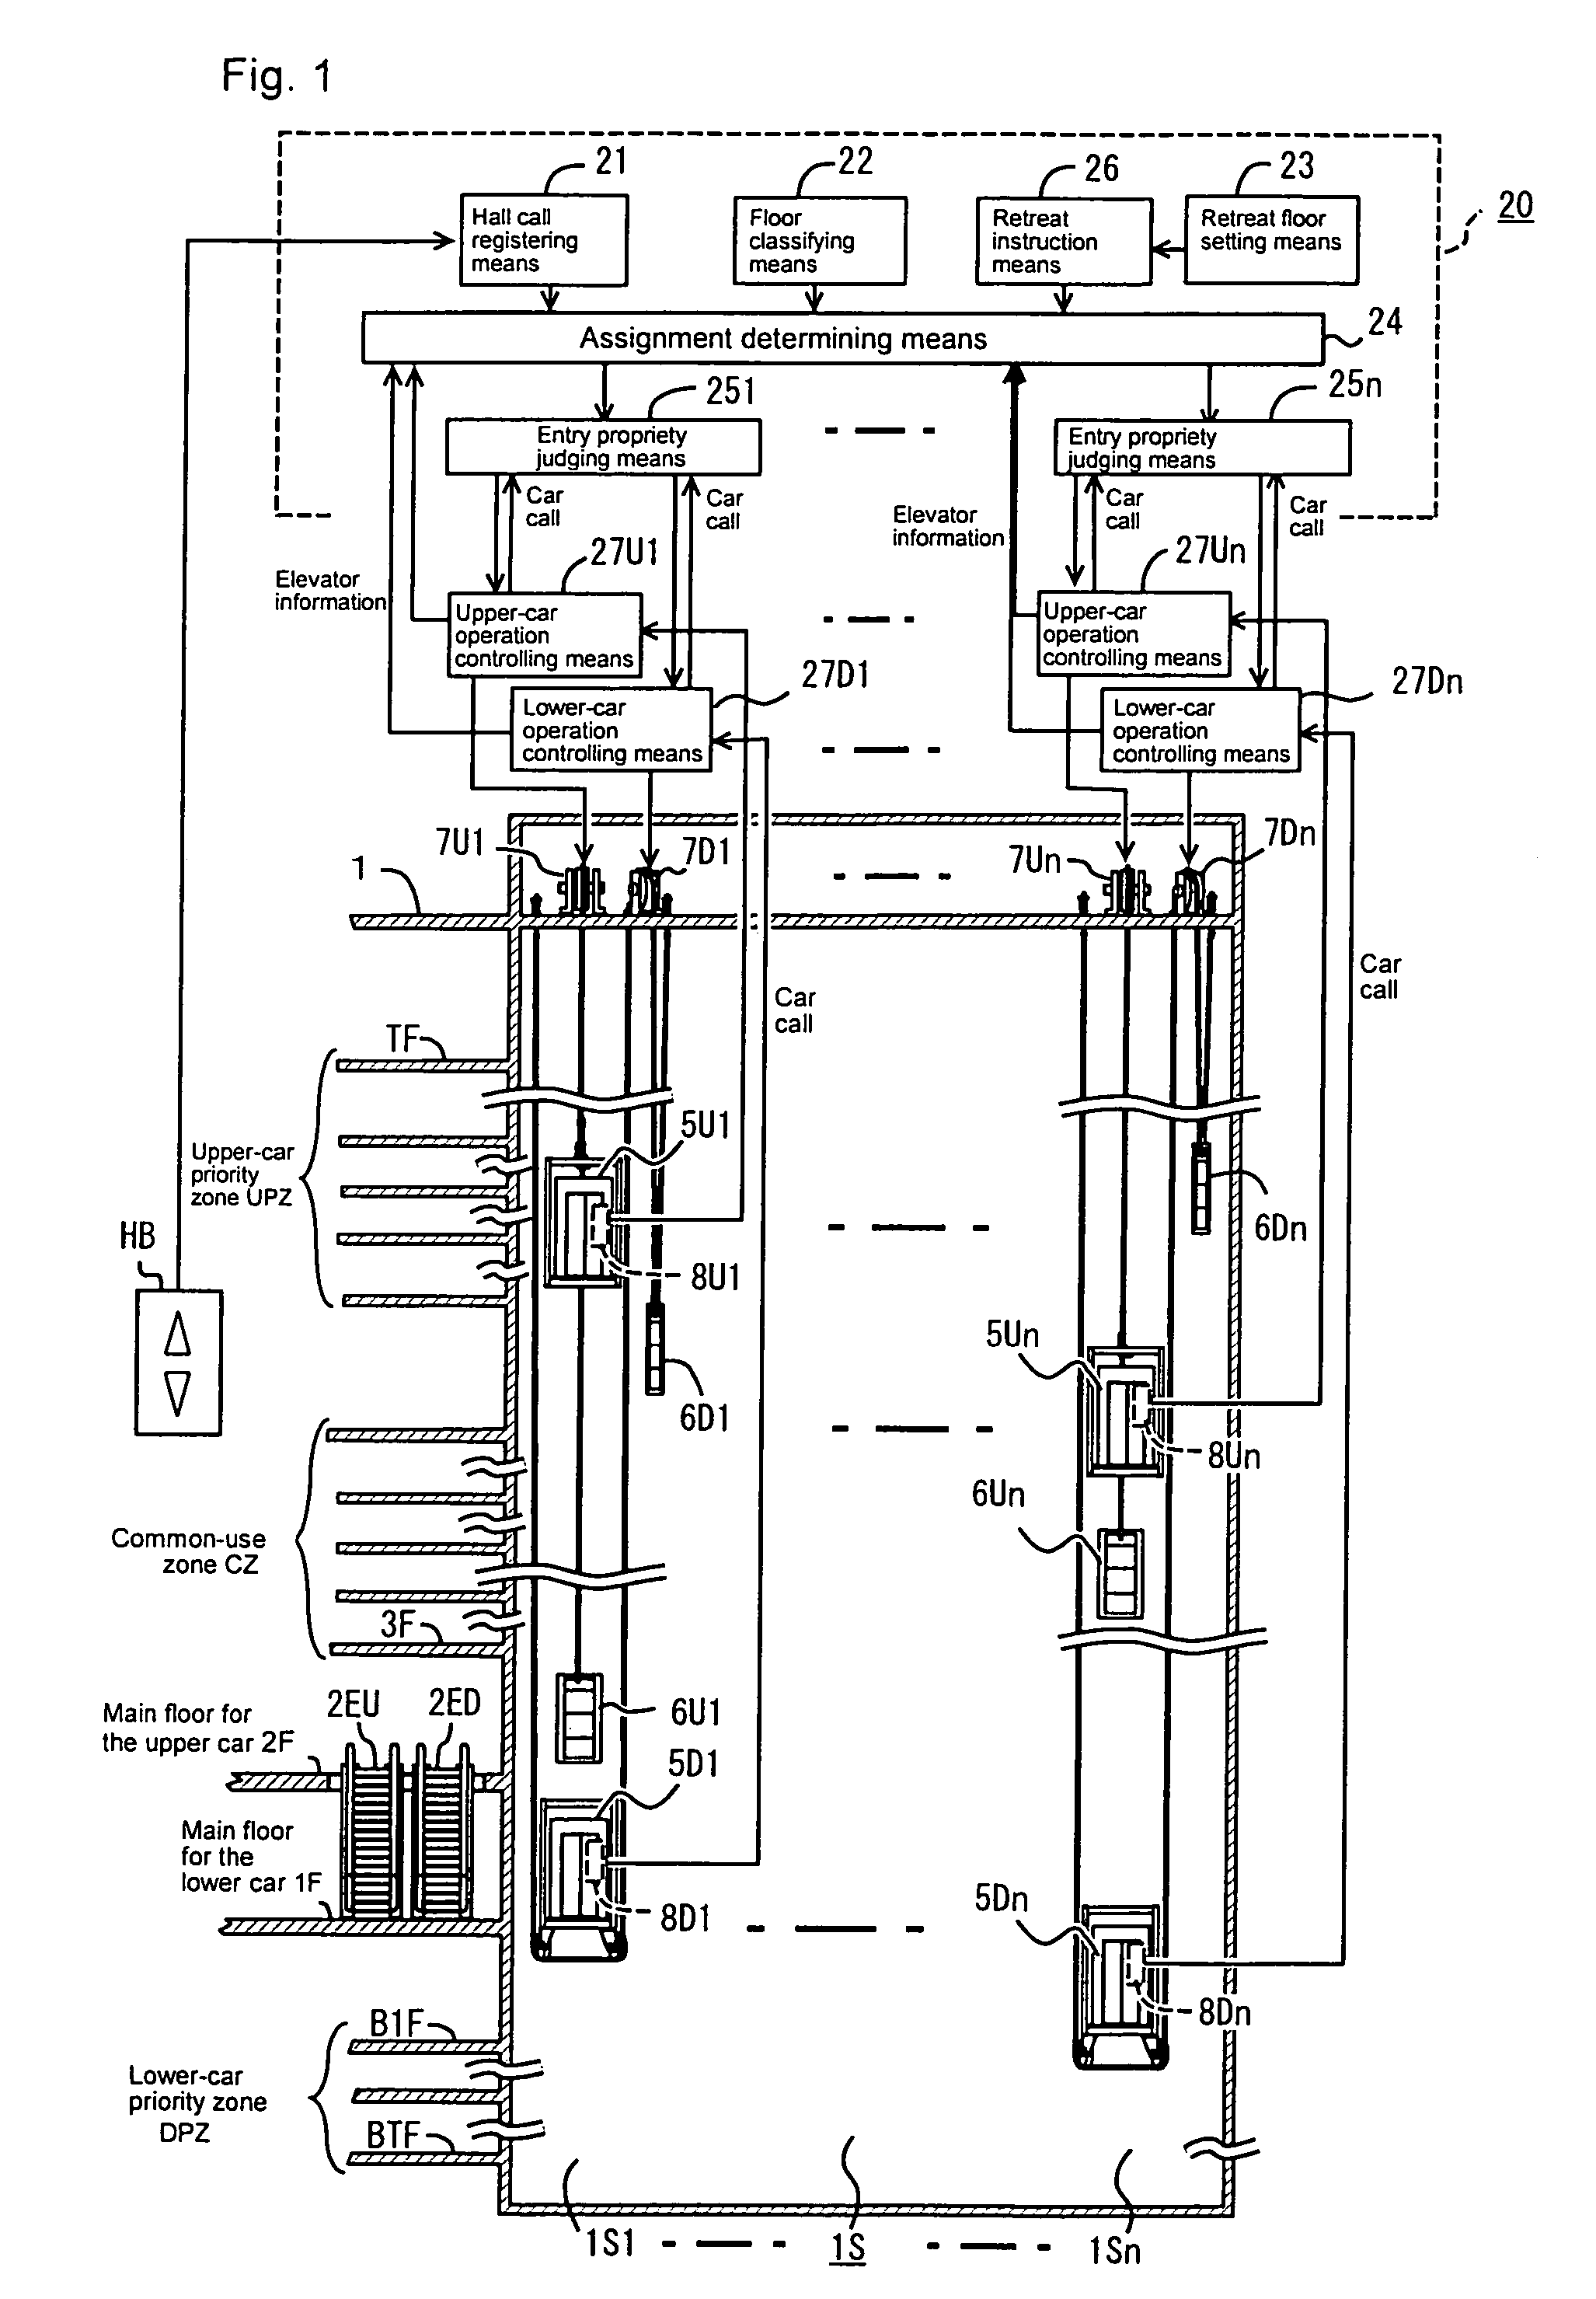 Apparatus for elevator group control